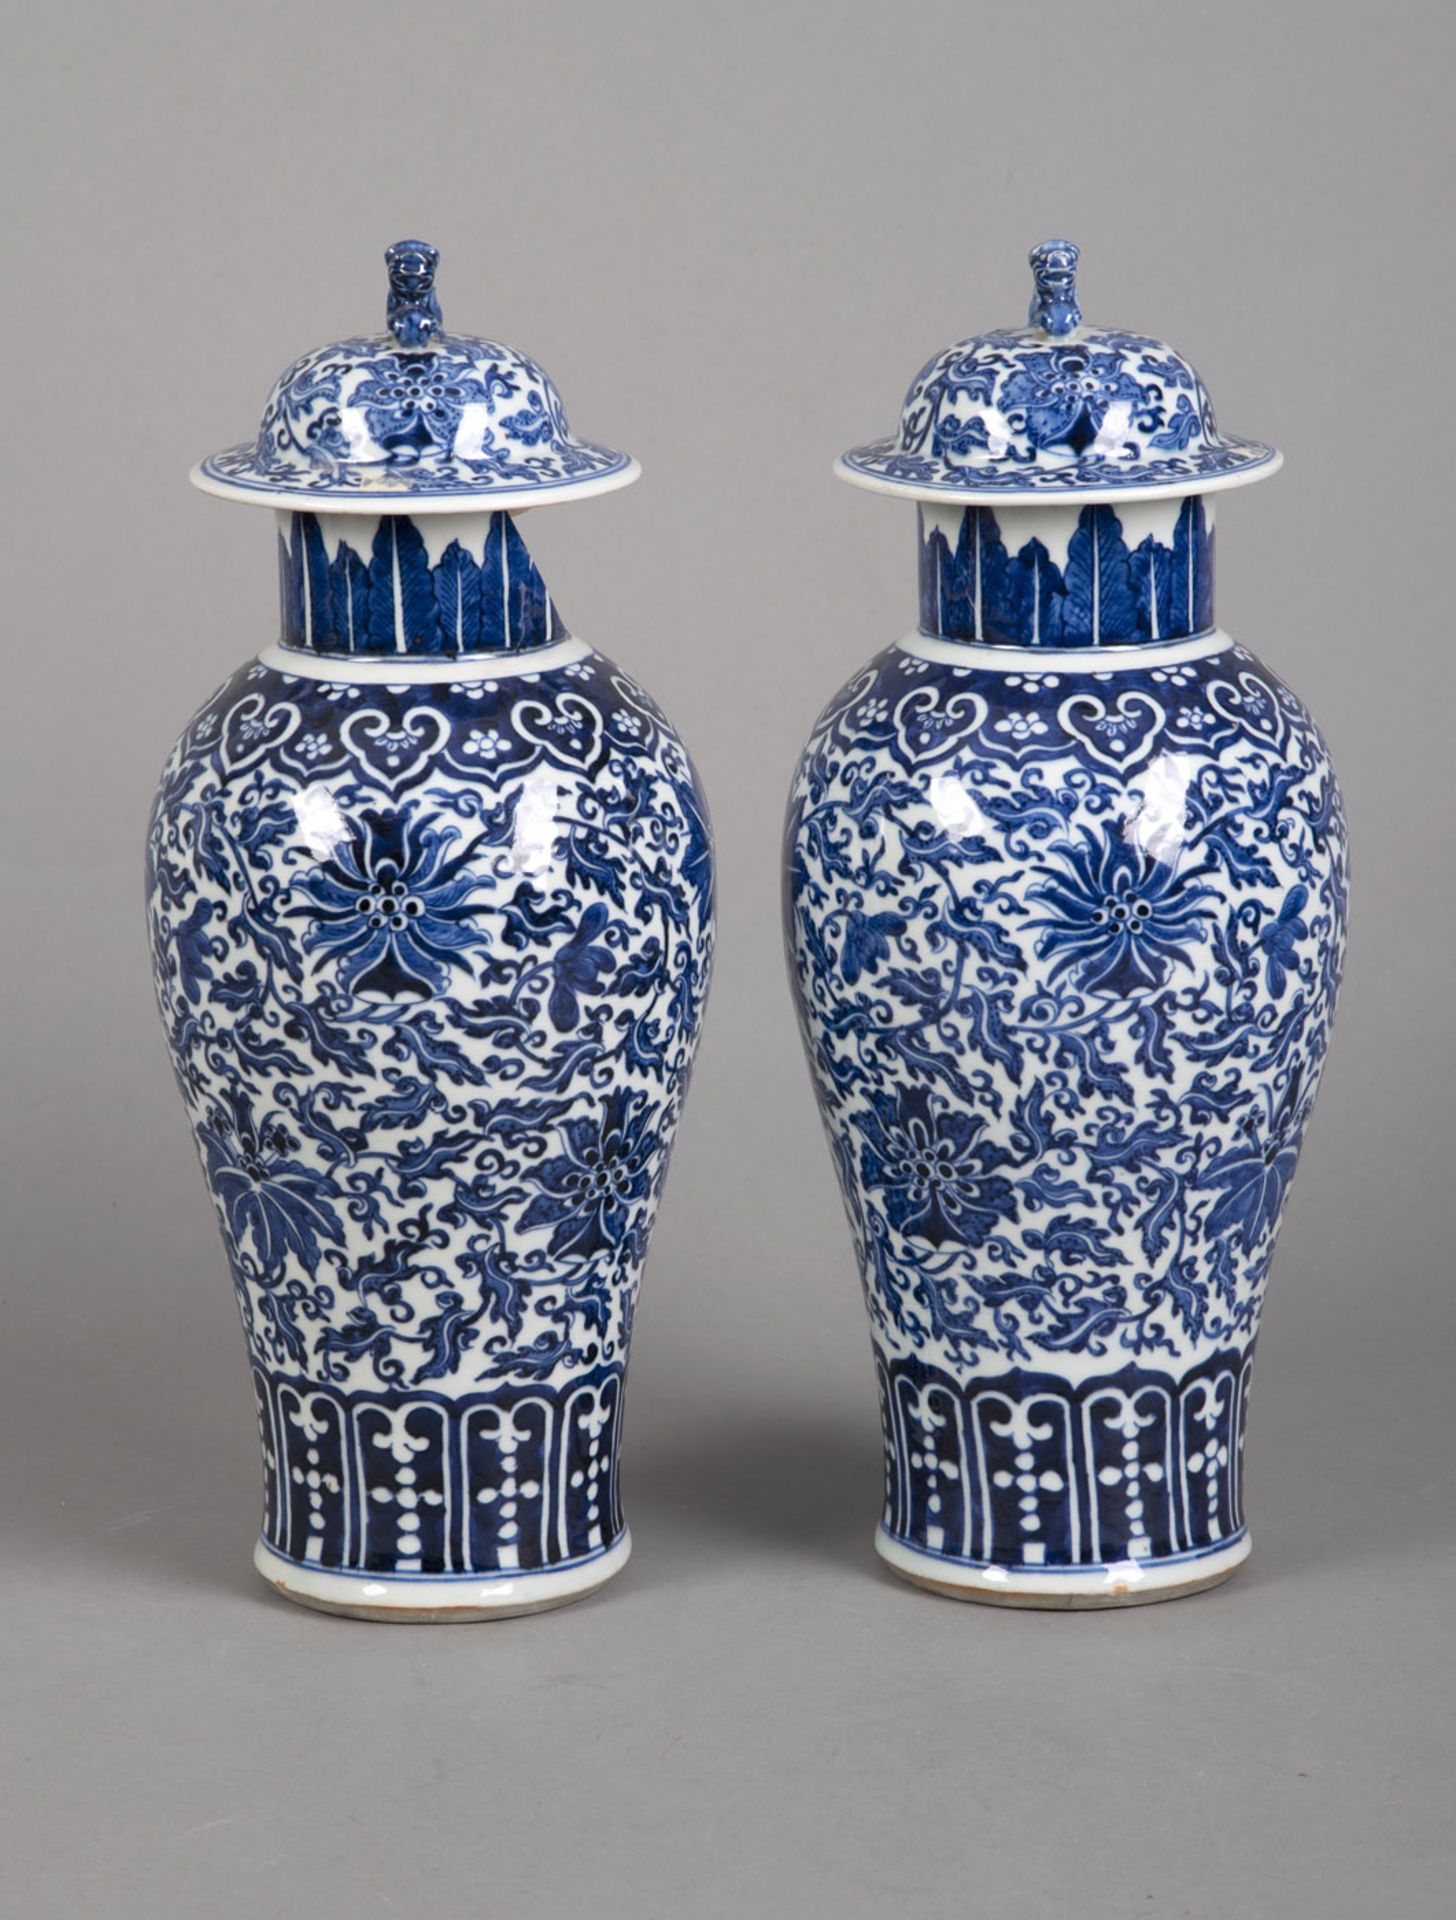 A PAIR OF BLUE AND WHITE PORCELAIN VASES WITH LION-HANDLED COVERS - Image 2 of 4